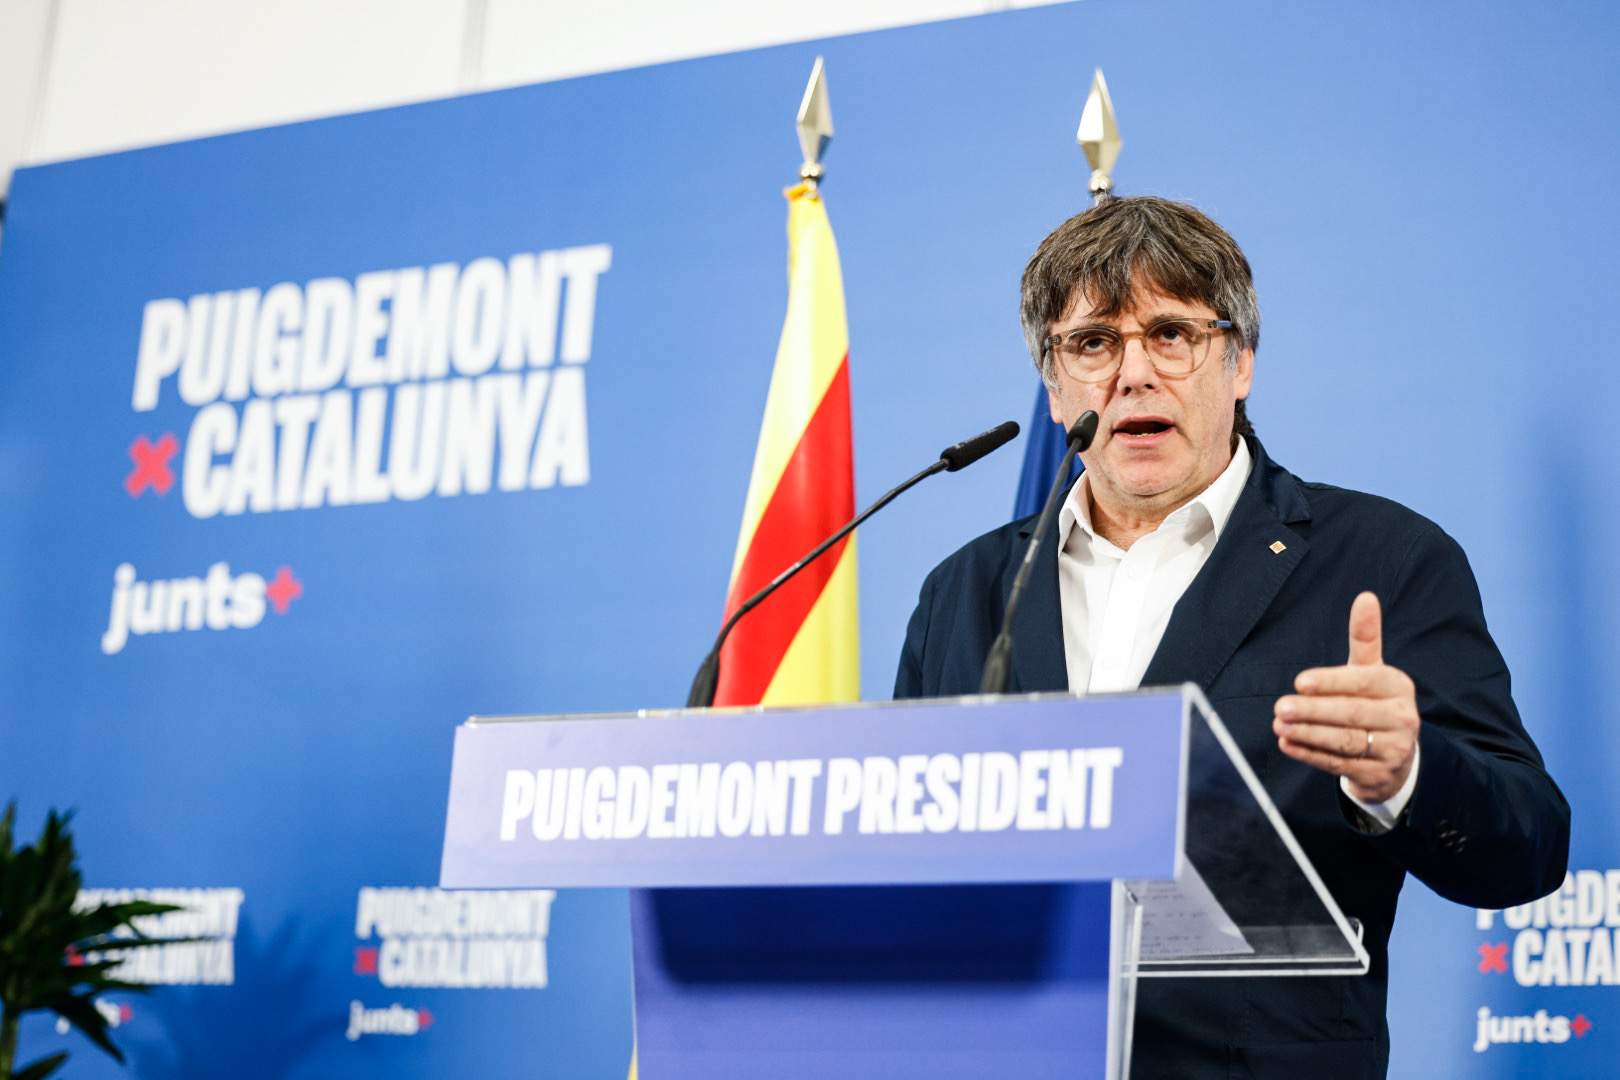 Puigdemont plans to present candidacy to lead a minority government in Catalonia